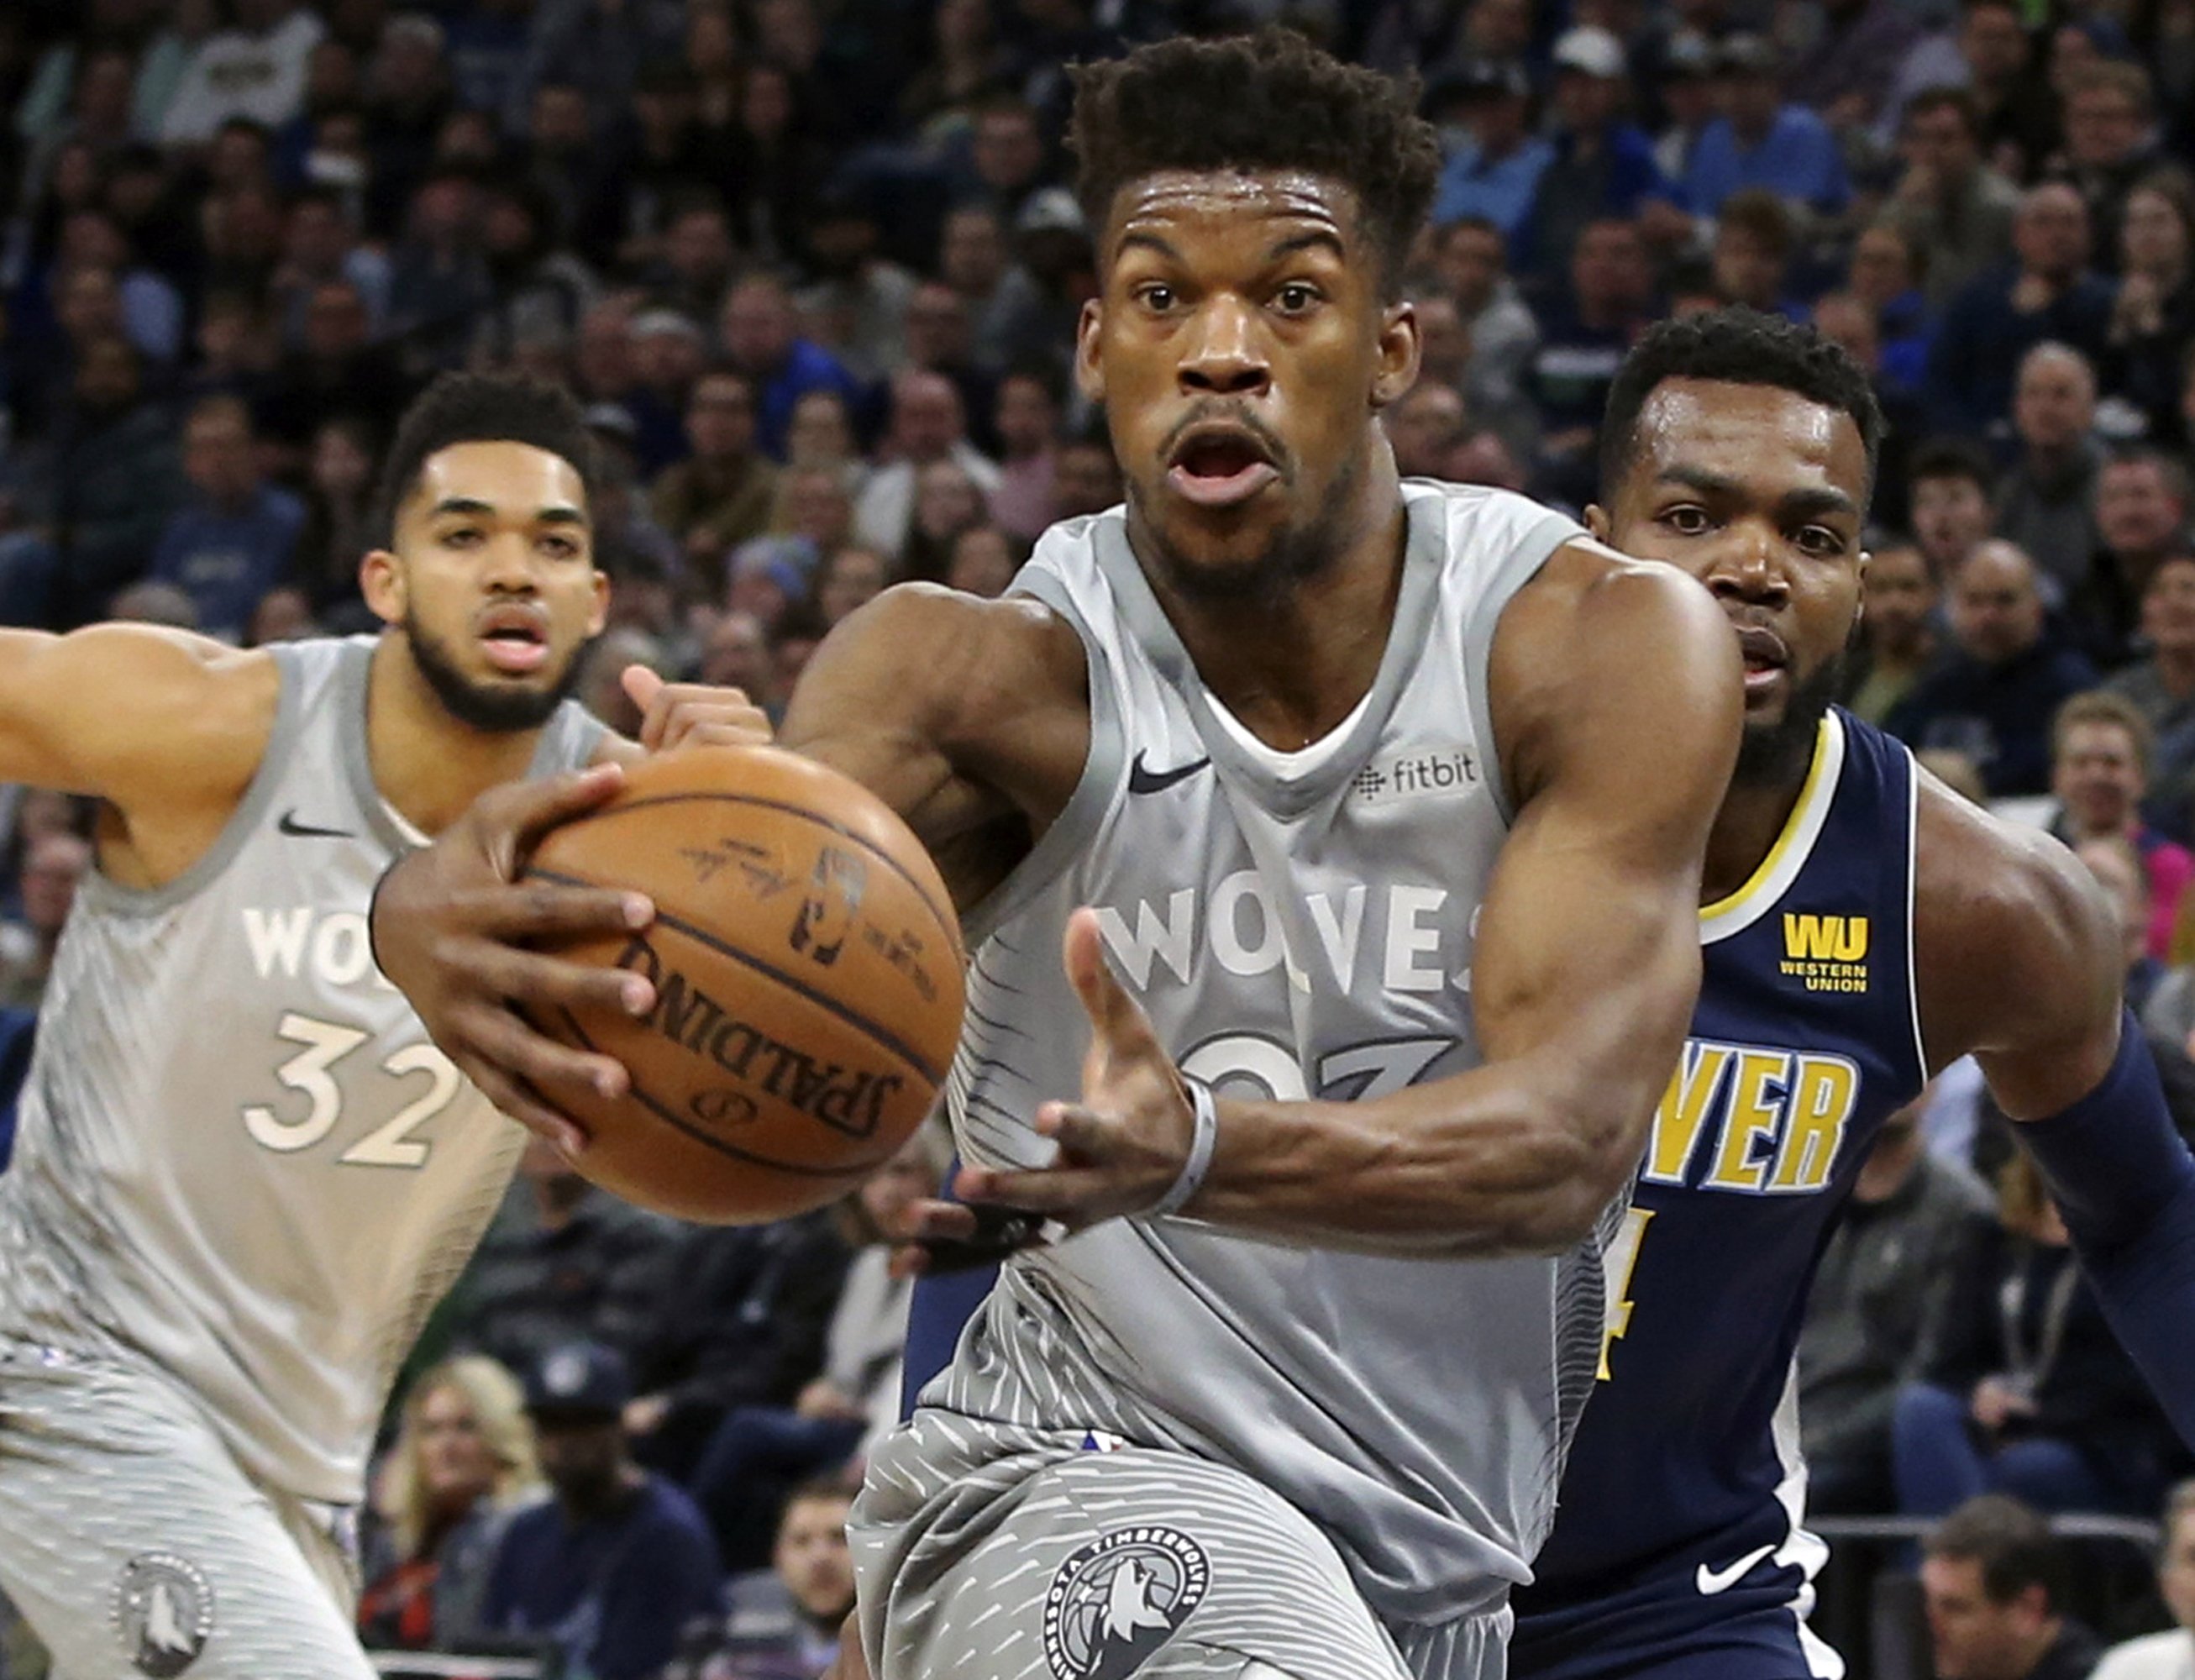 Butler practices again with Wolves, as opener nears